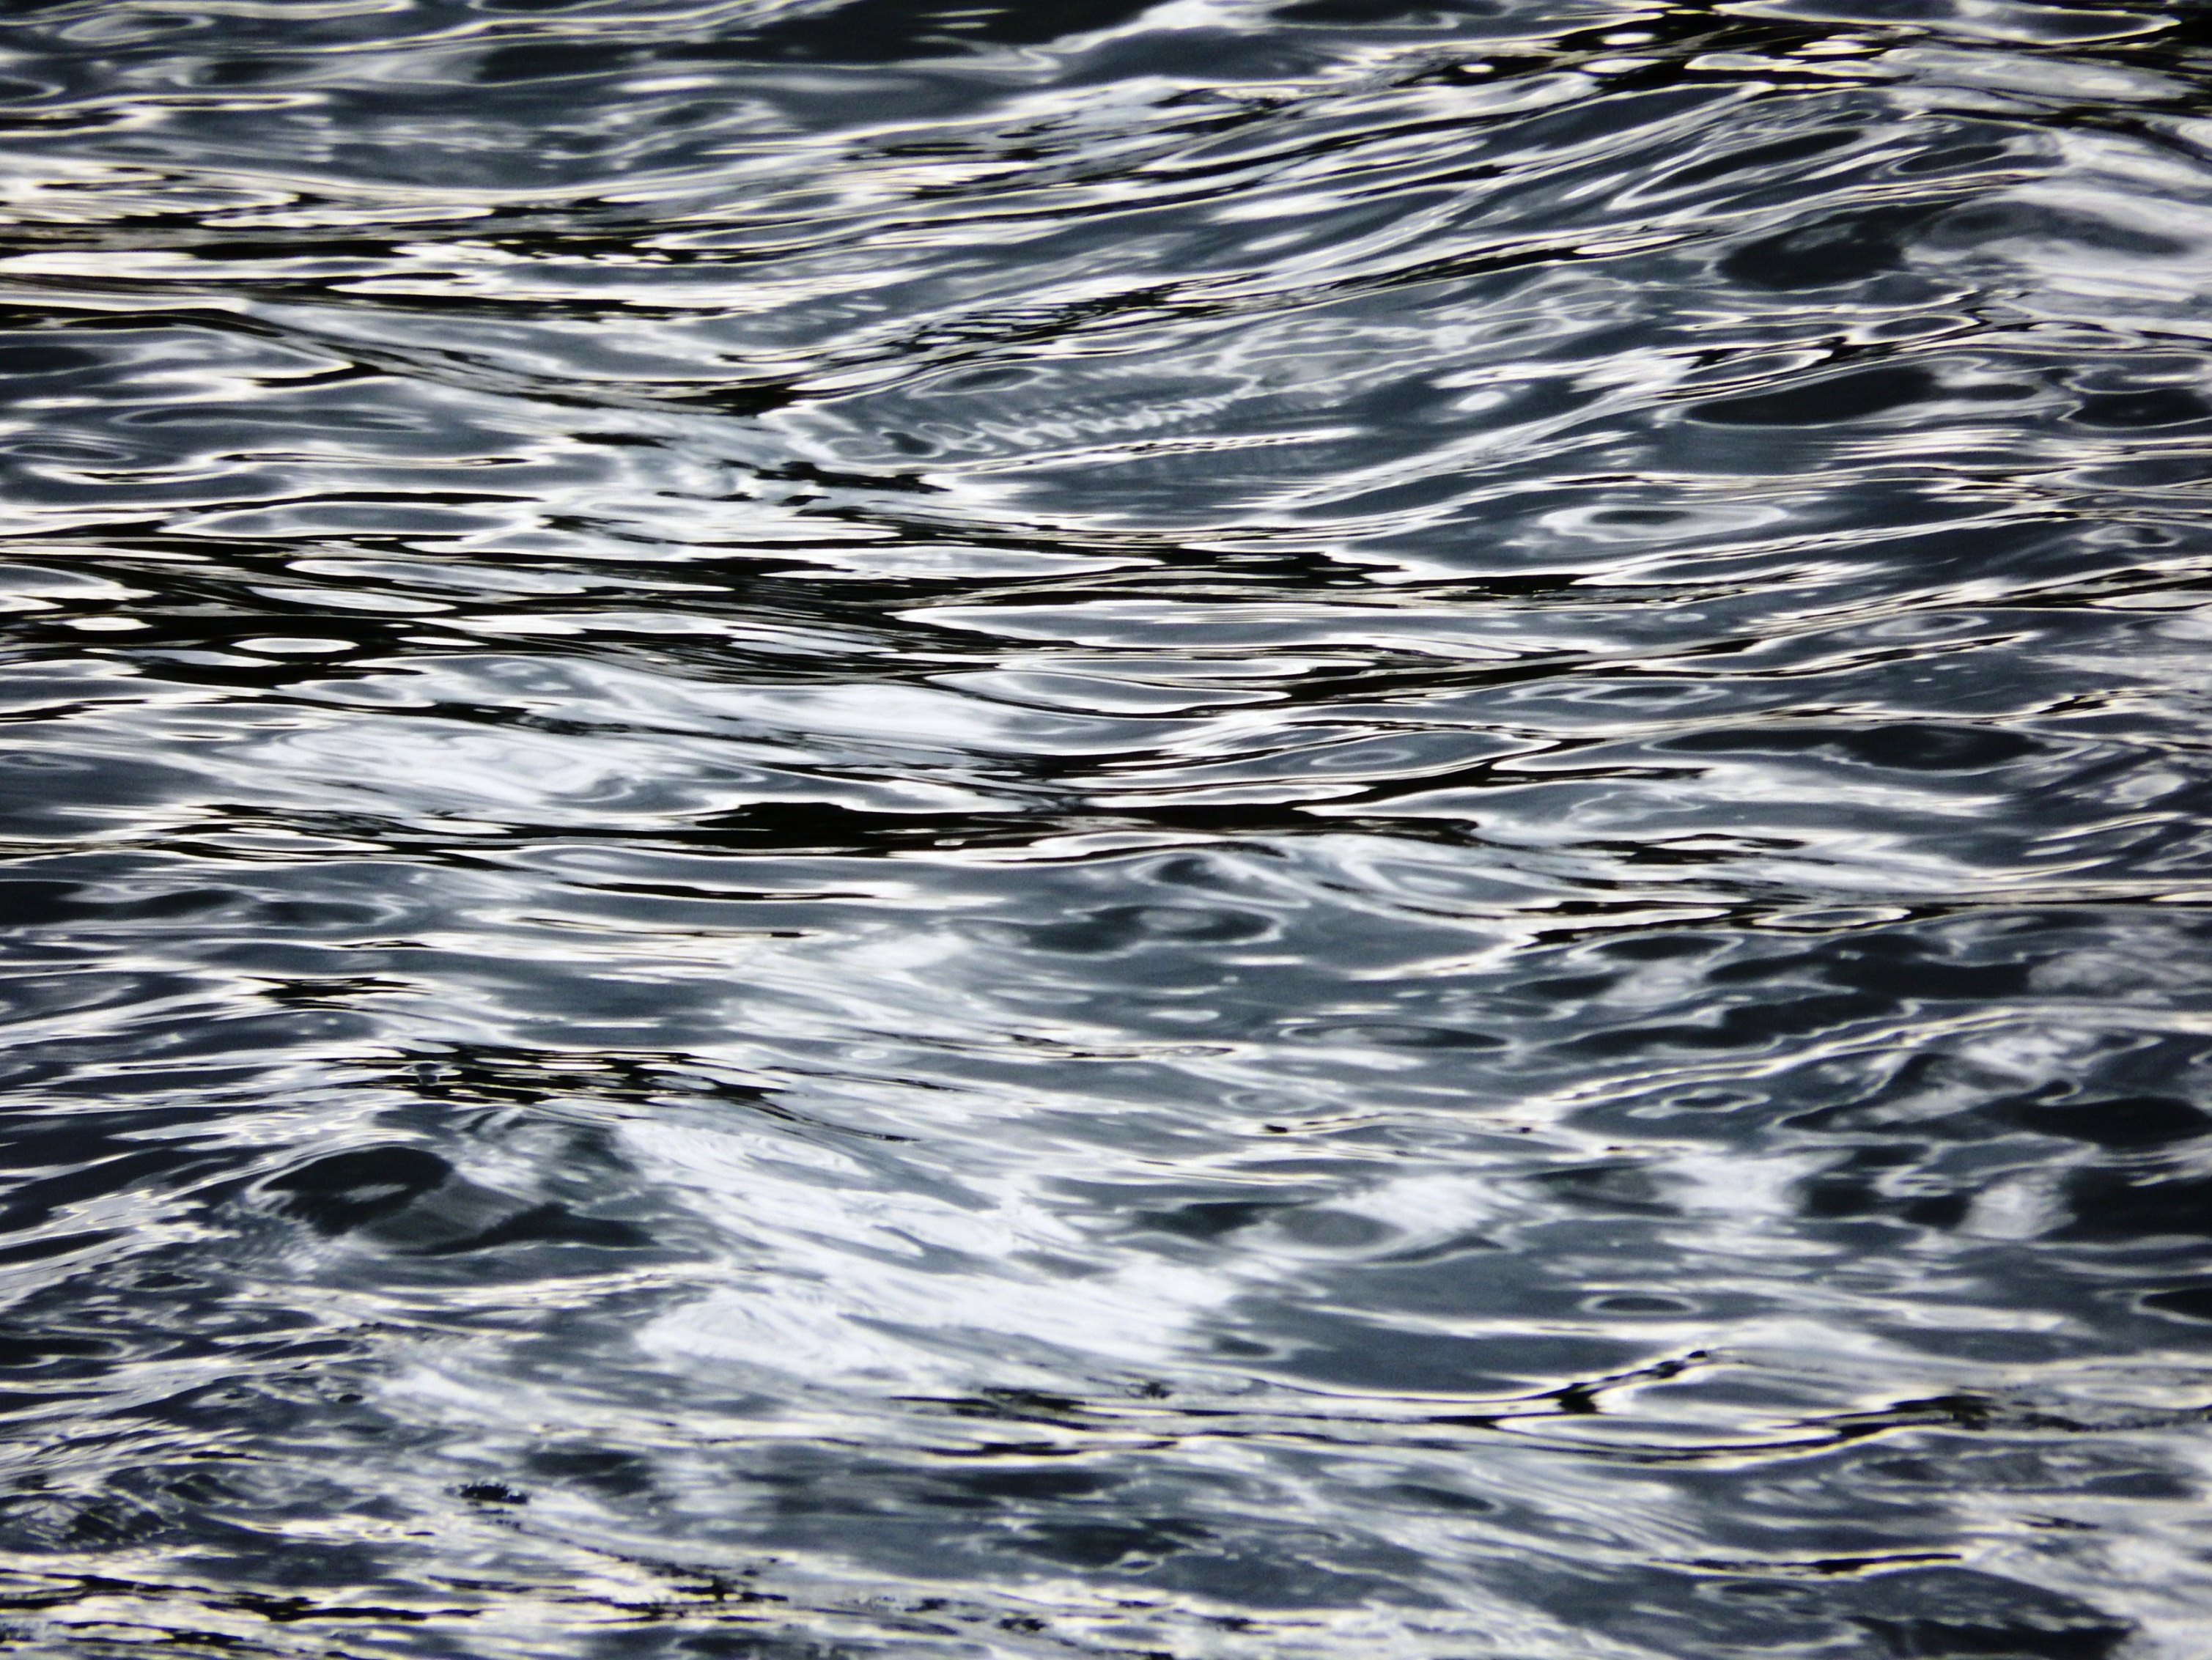 Ocean ripples and Waves Texture, Abstract, Sea, Wave, Water, HQ Photo